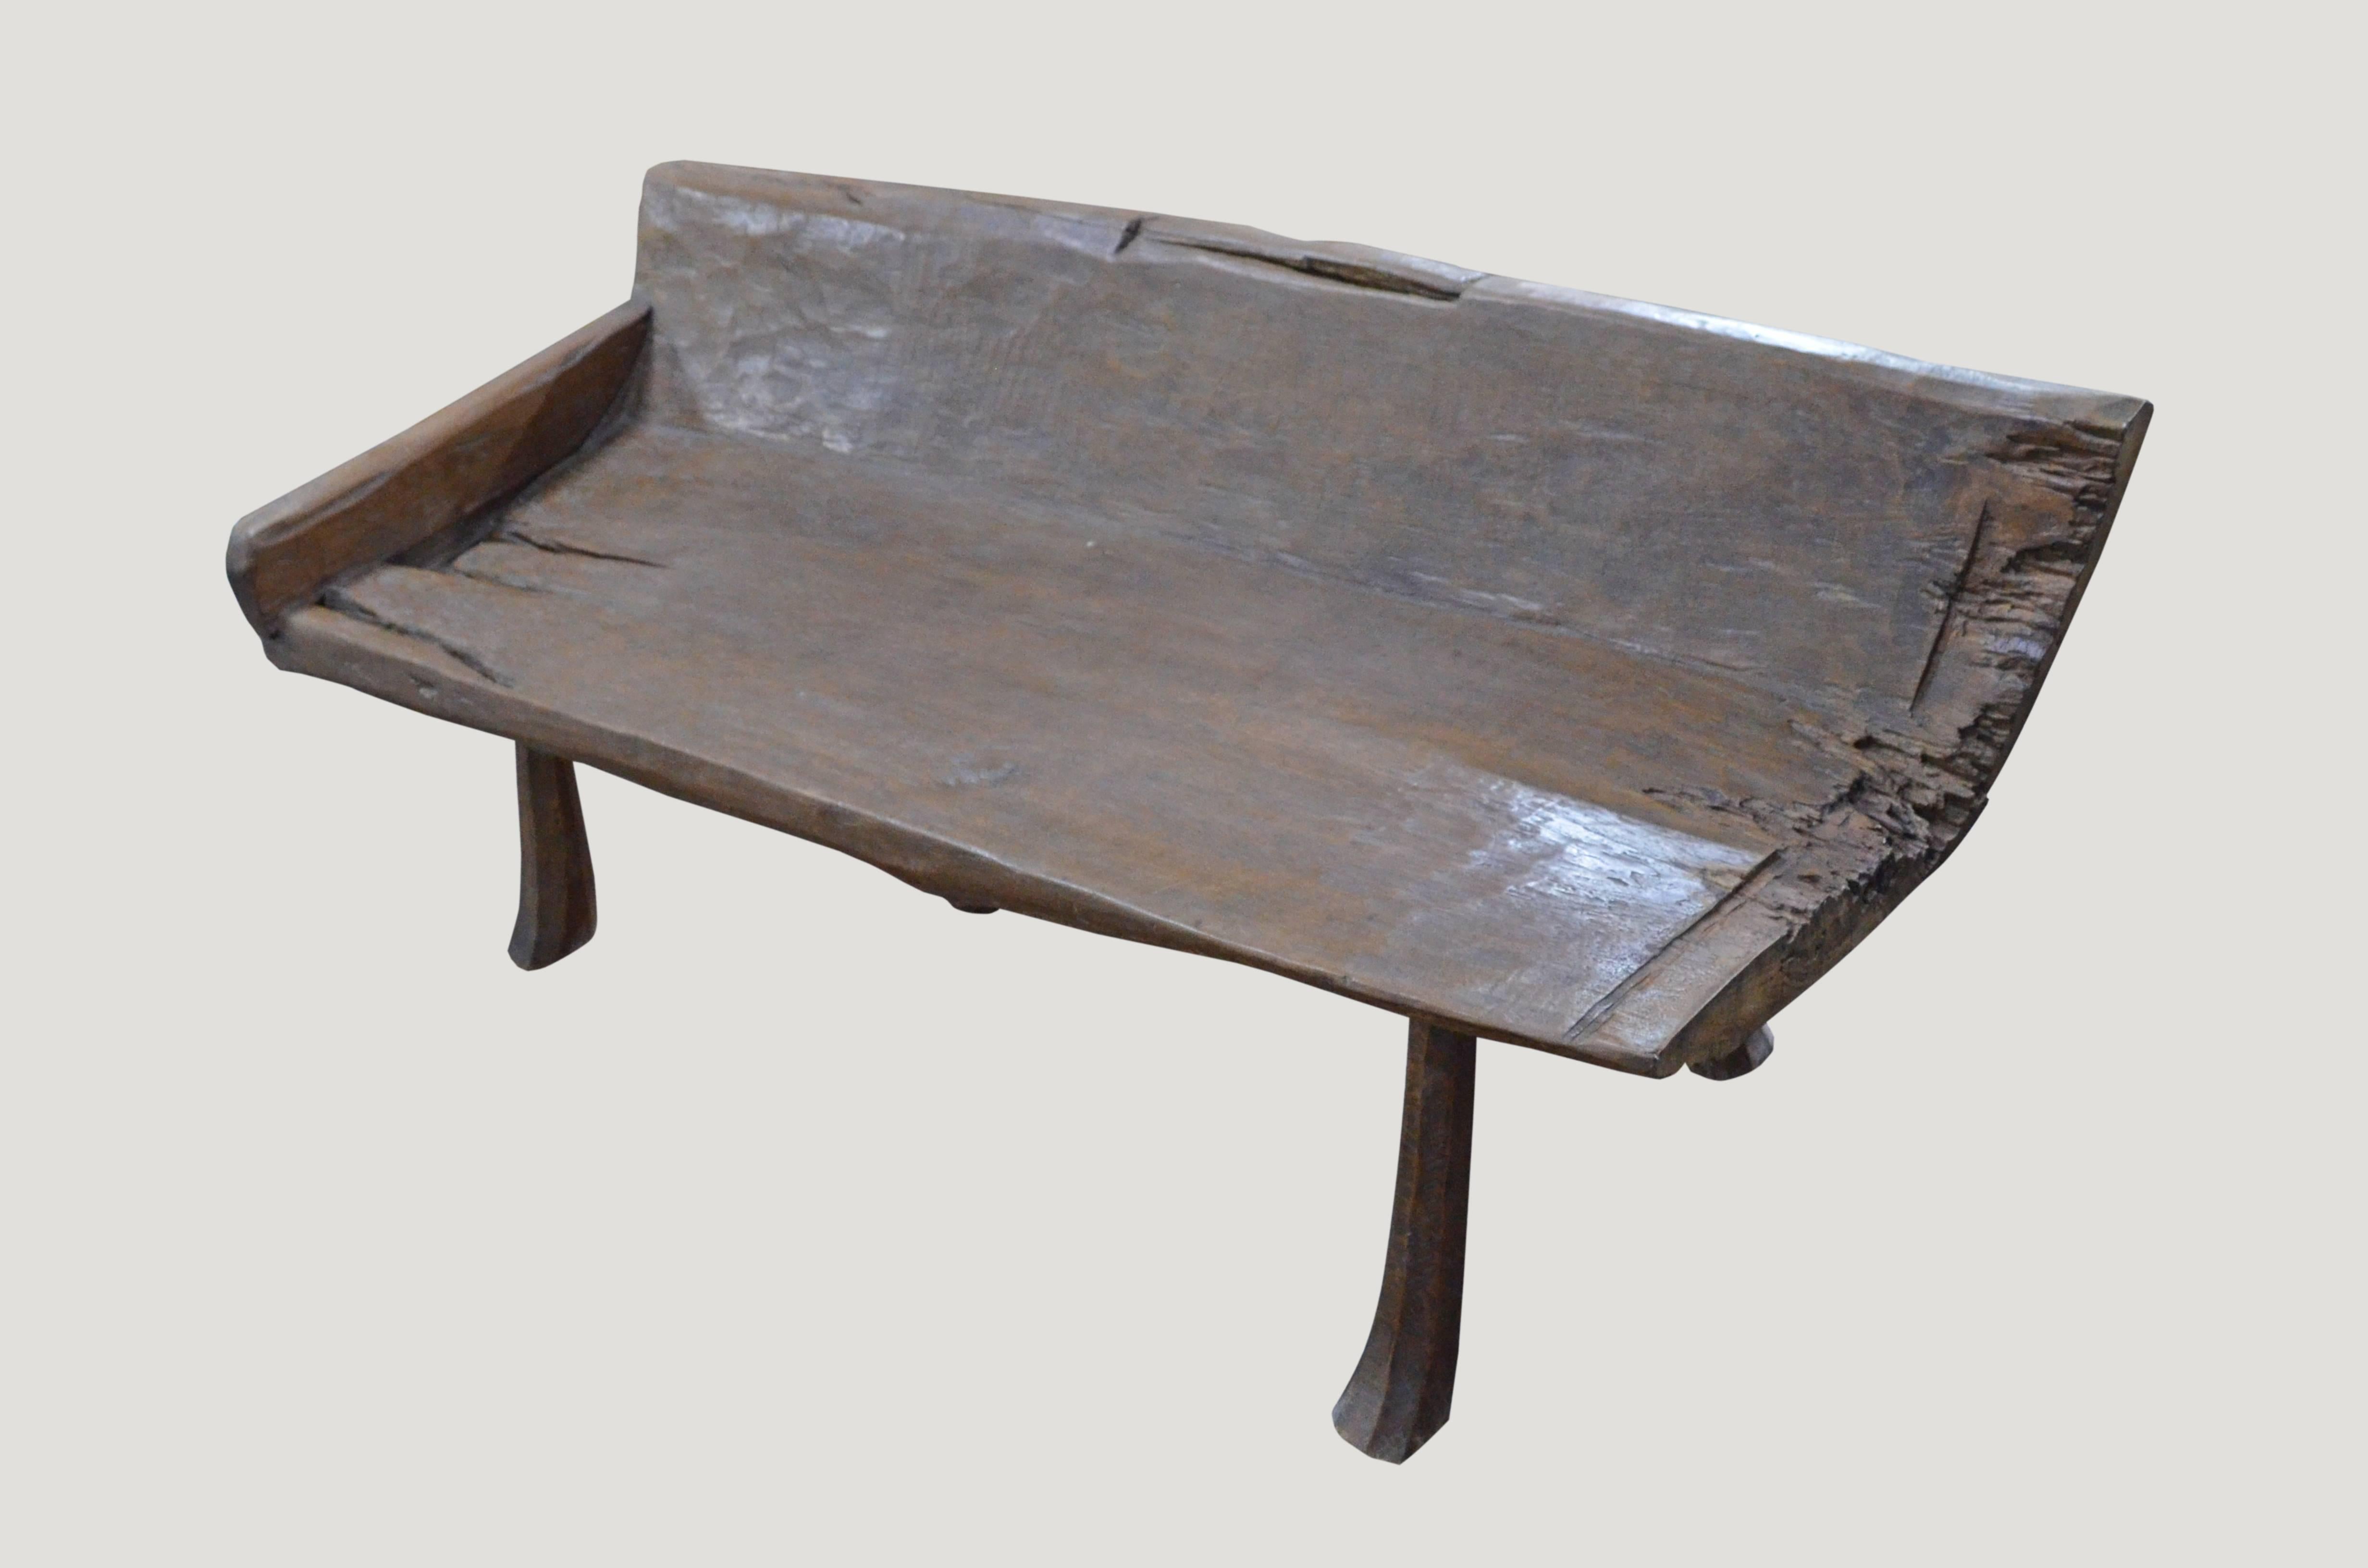 Stunning antique Primitive bench with beautiful patina made of teak wood. The seat section and back rest are carved from a single solid slab of aged teak wood. For the Primitive collector.

This bench was sourced in the spirit of wabi-sabi, a